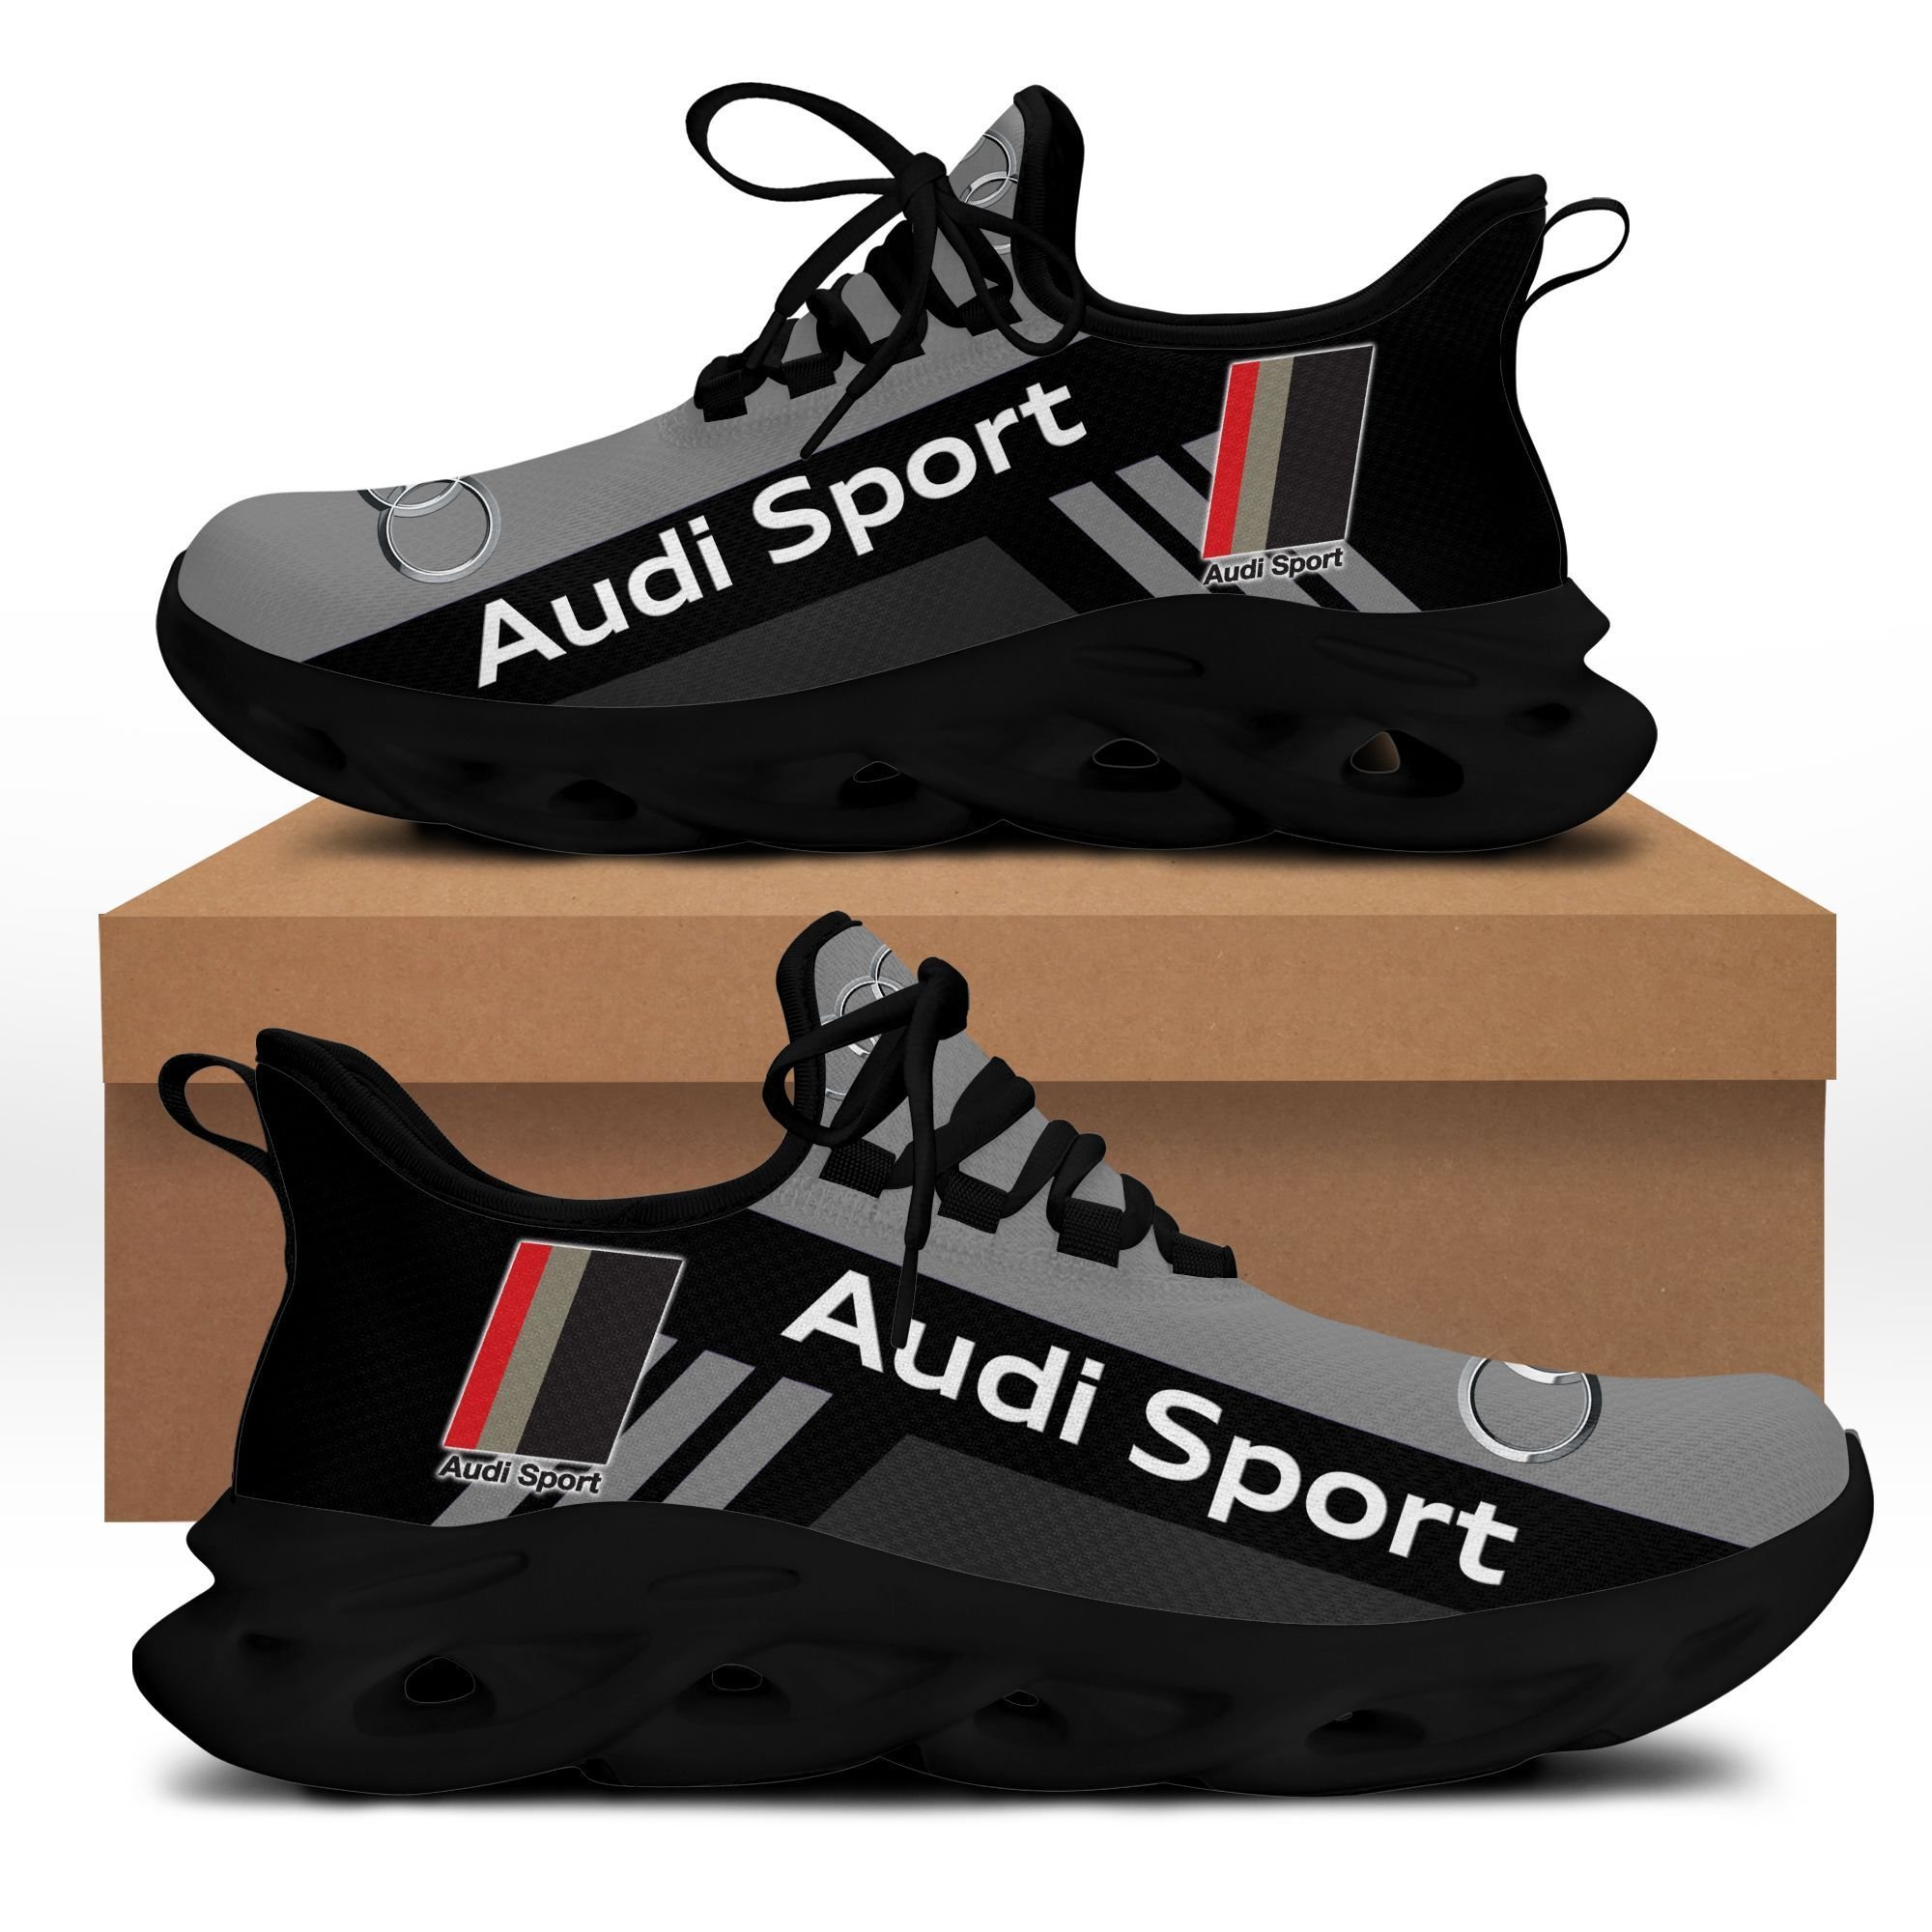 Audi Sport clunky max soul shoes 5